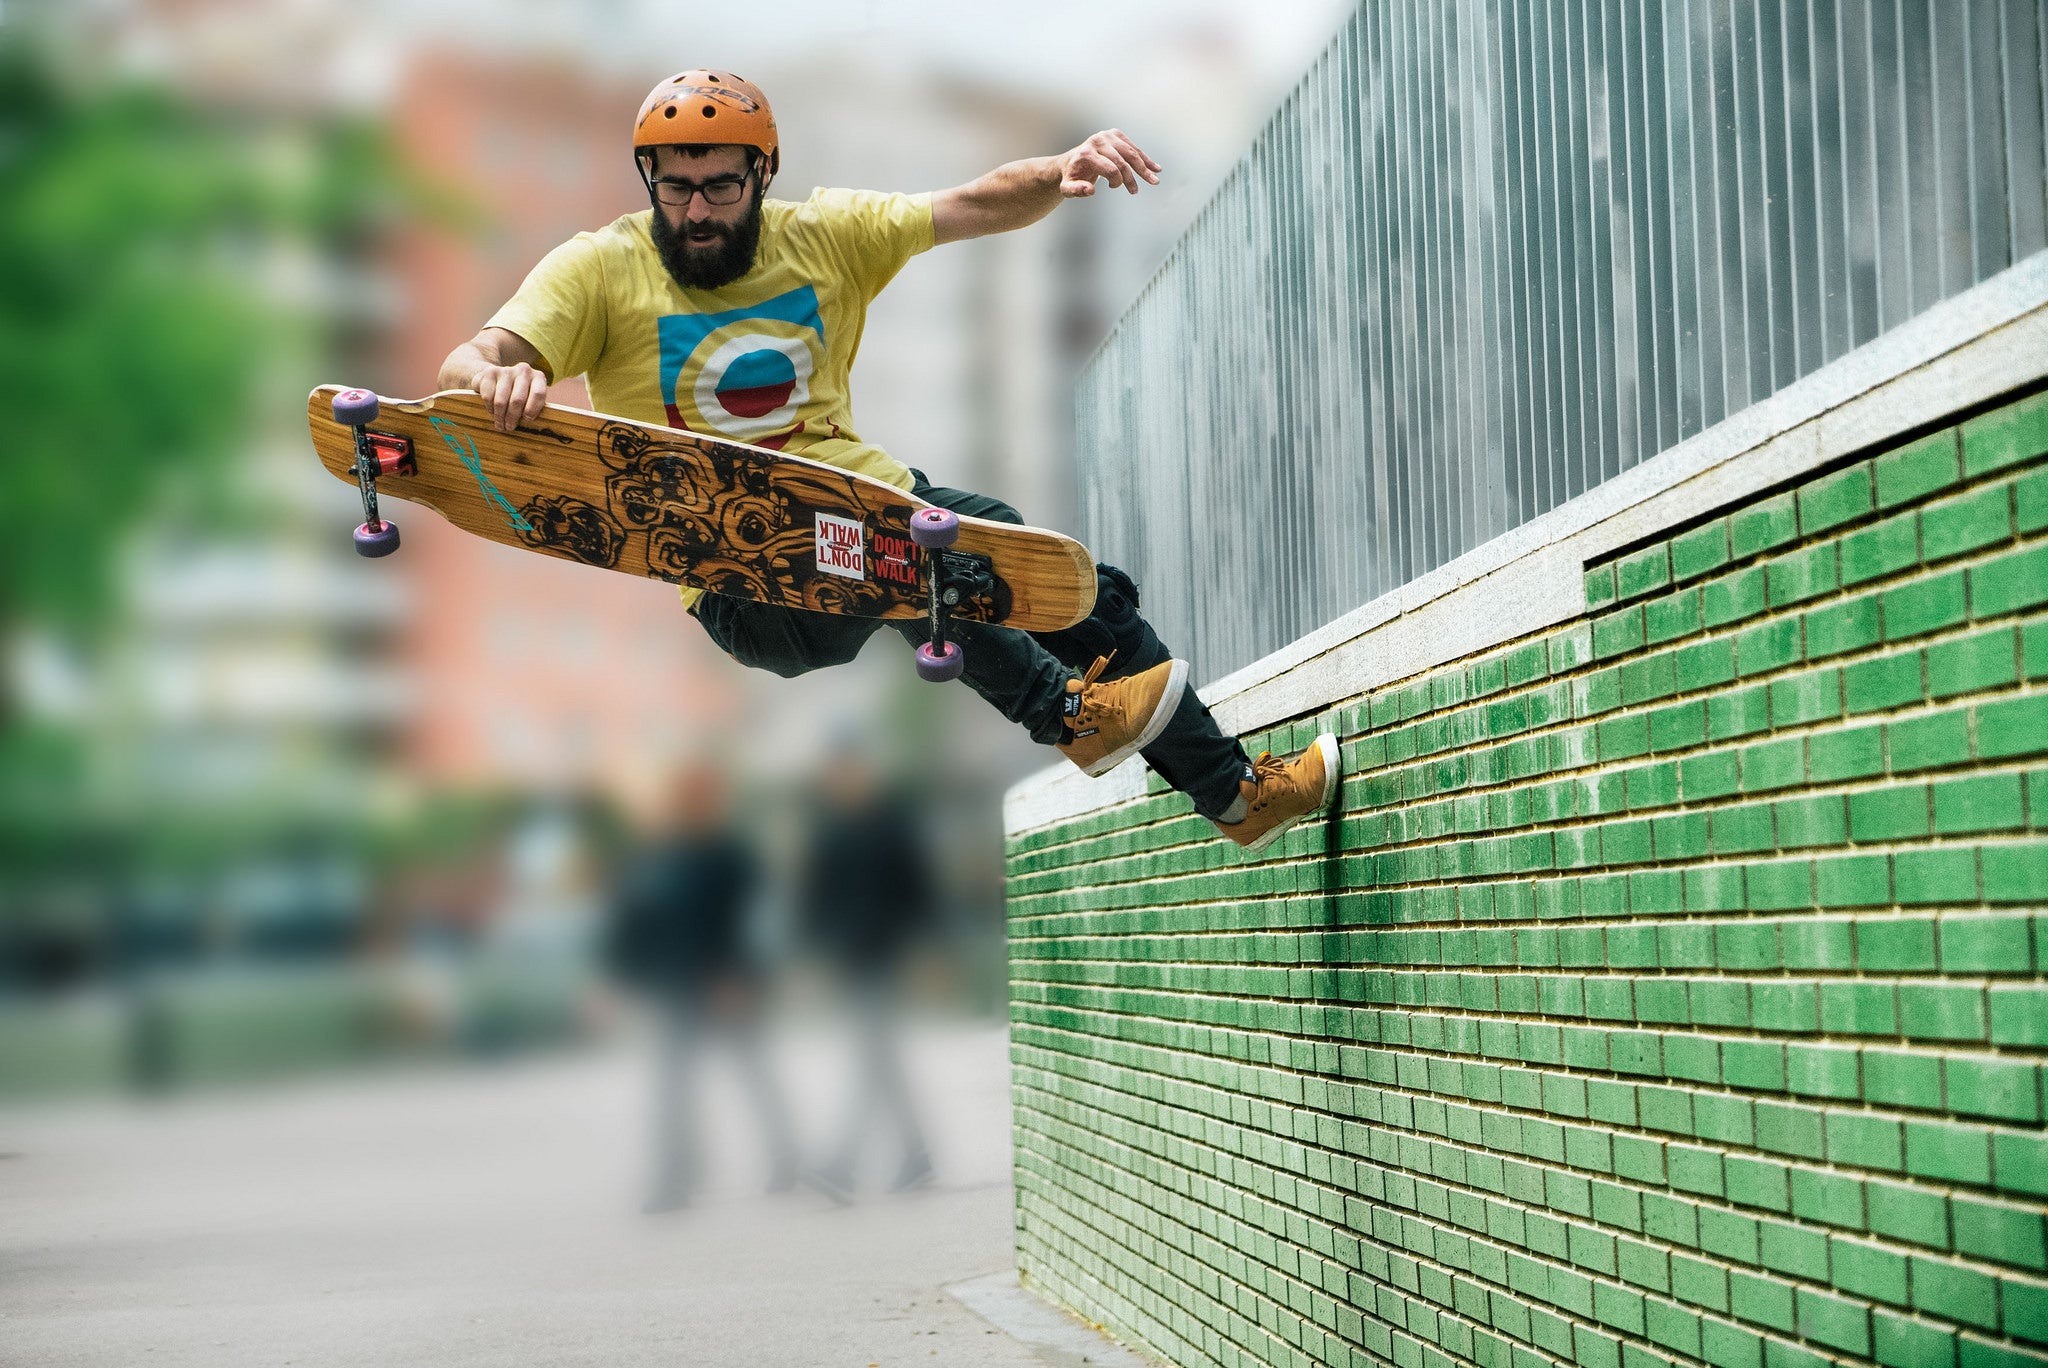 loaded-boards-6-most-influential-brands-in-skateboarding-photo